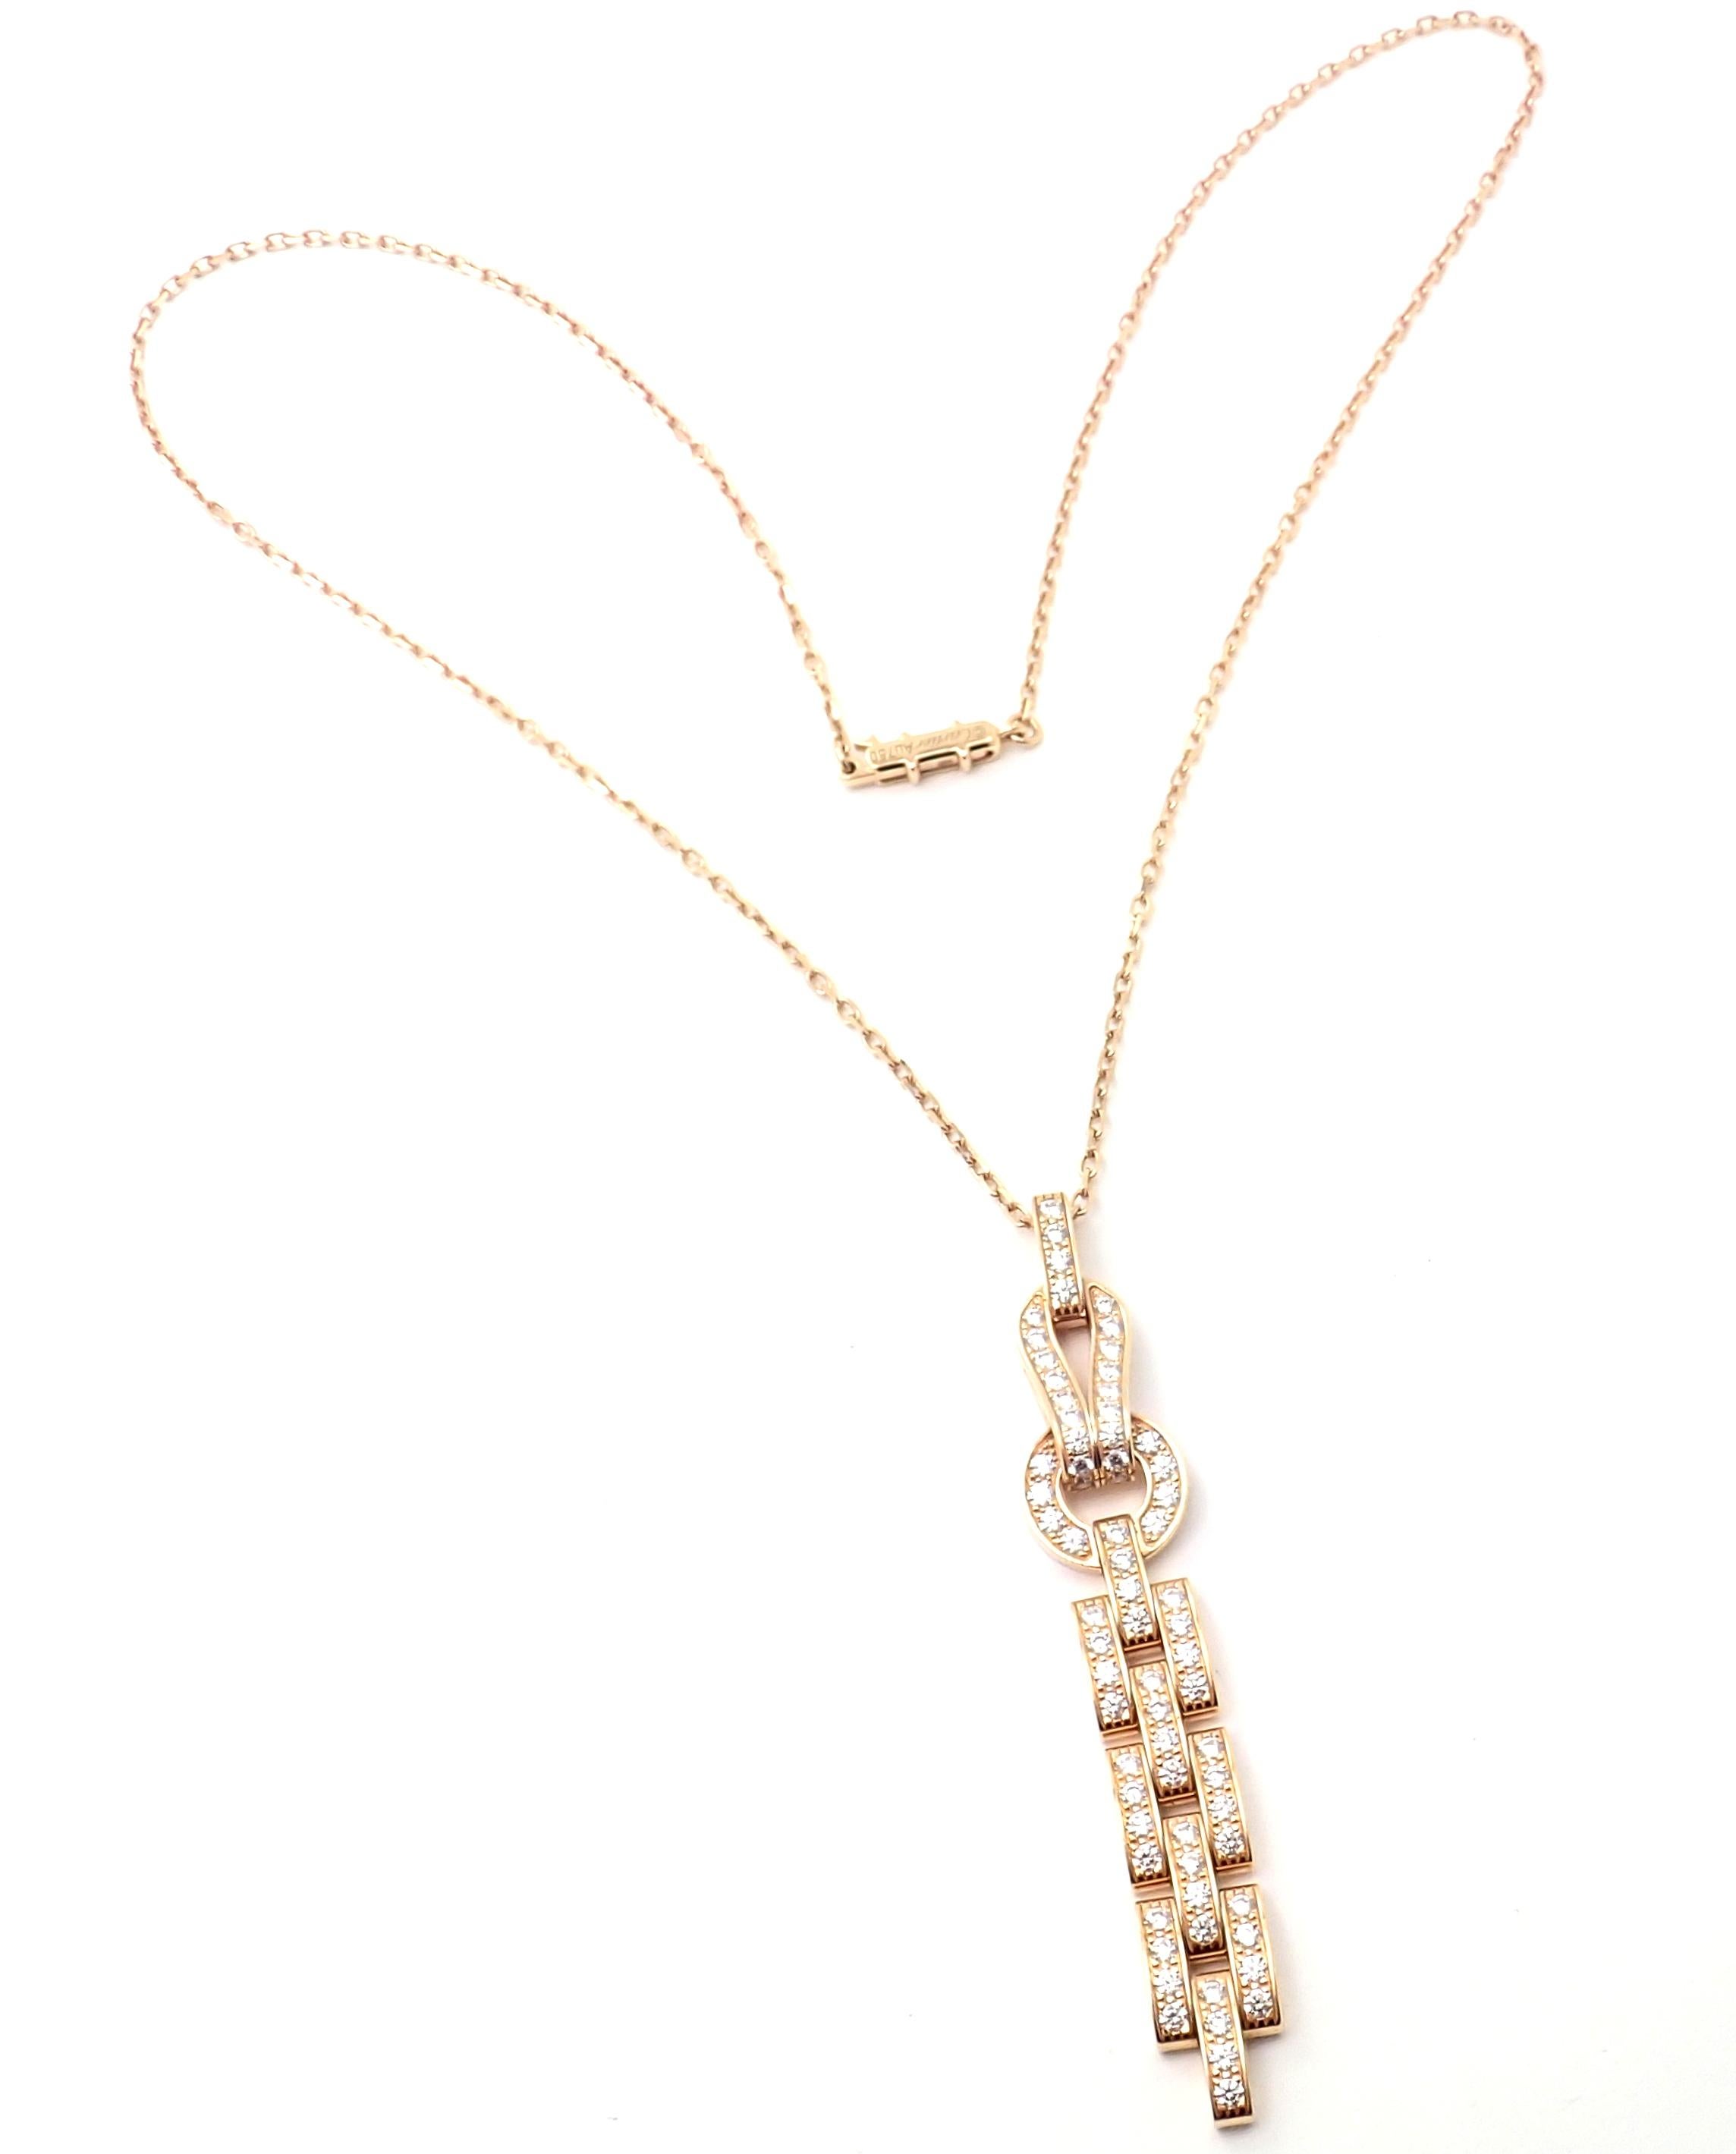 18k Rose Gold Diamond Agrafe Pendant Necklace by Cartier.
With 73 Round brilliant cut diamonds VVS1 clarity F color Total Diamond Weight approx. 1.48ct
Details:
Length: 17